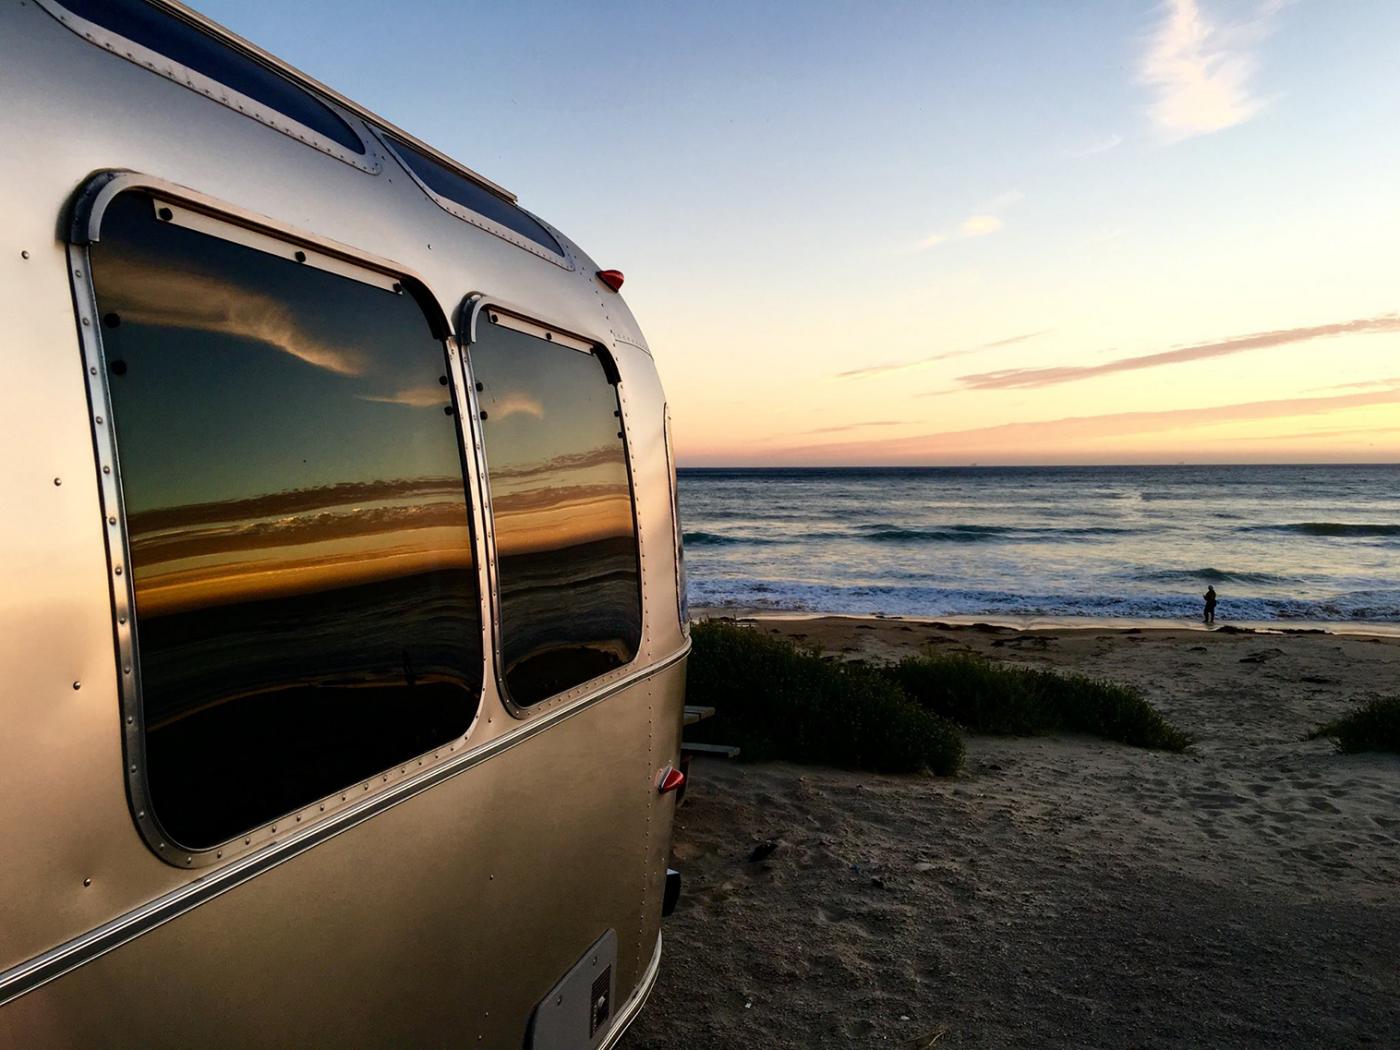 Rent this Airstream RV to make your next summer trip one to remember.